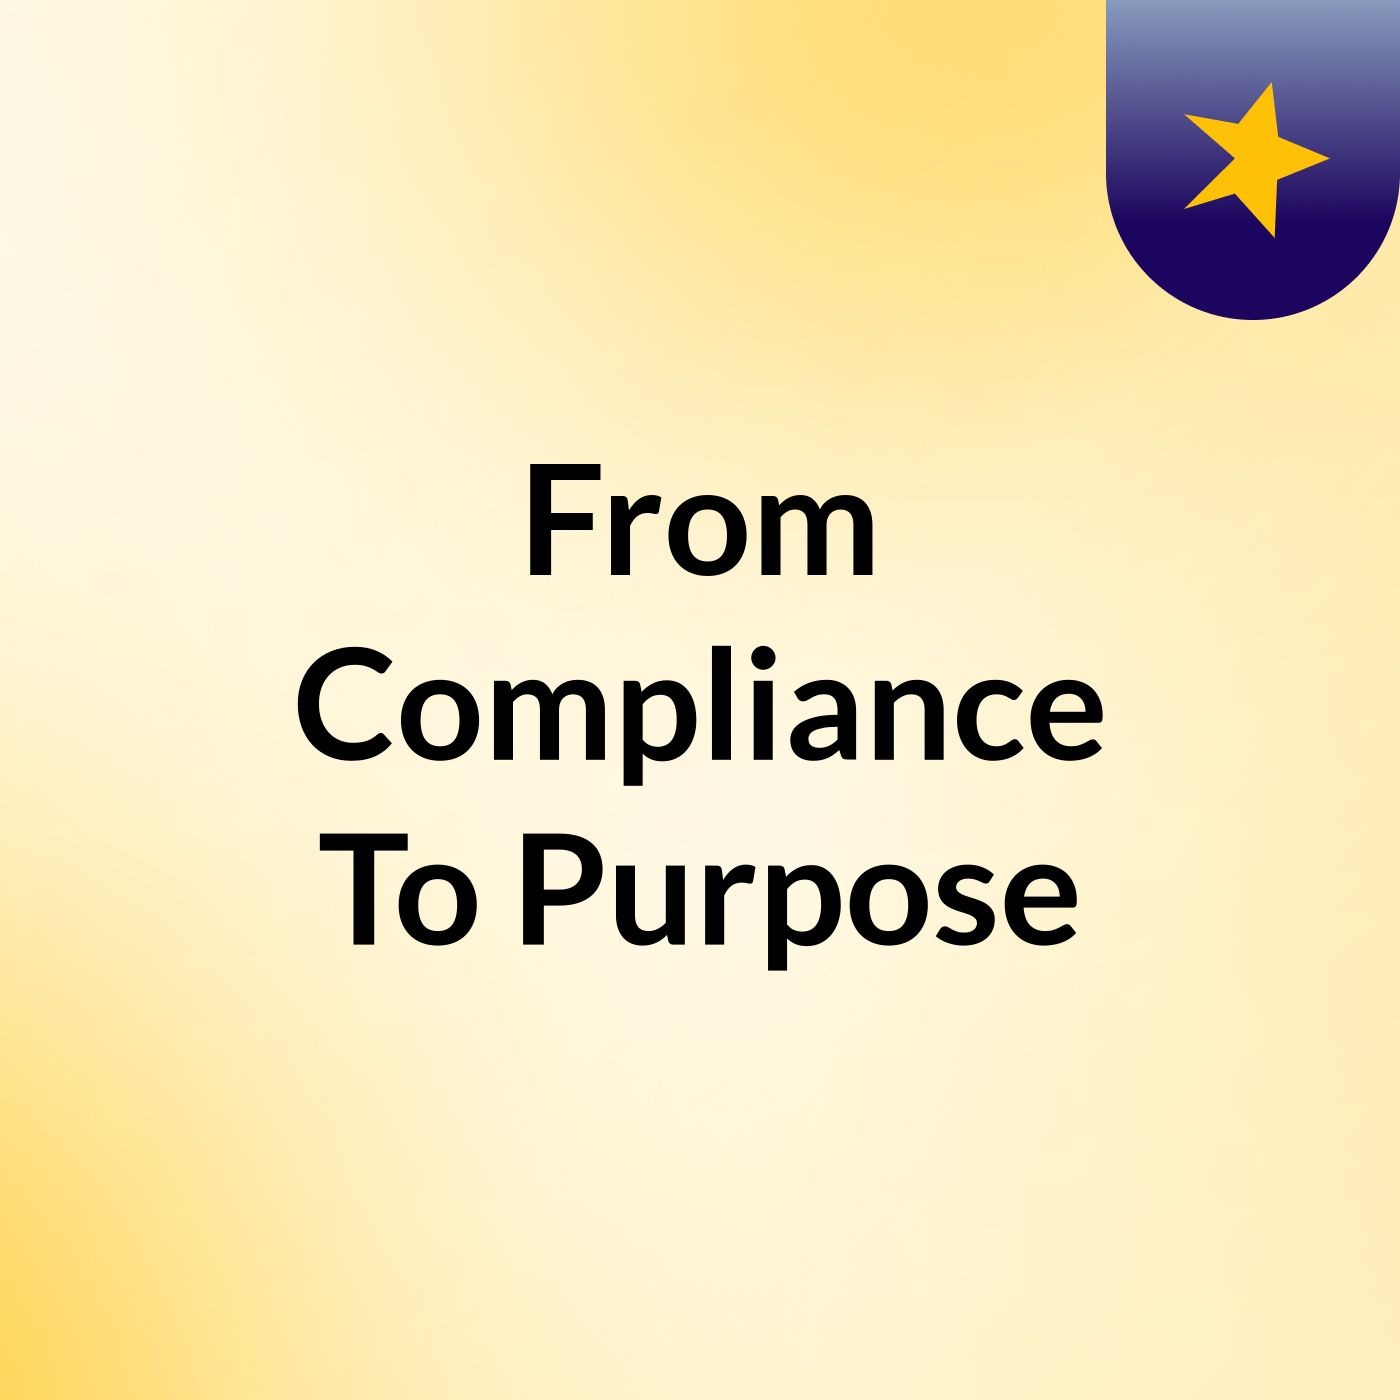 From Compliance to Purpose